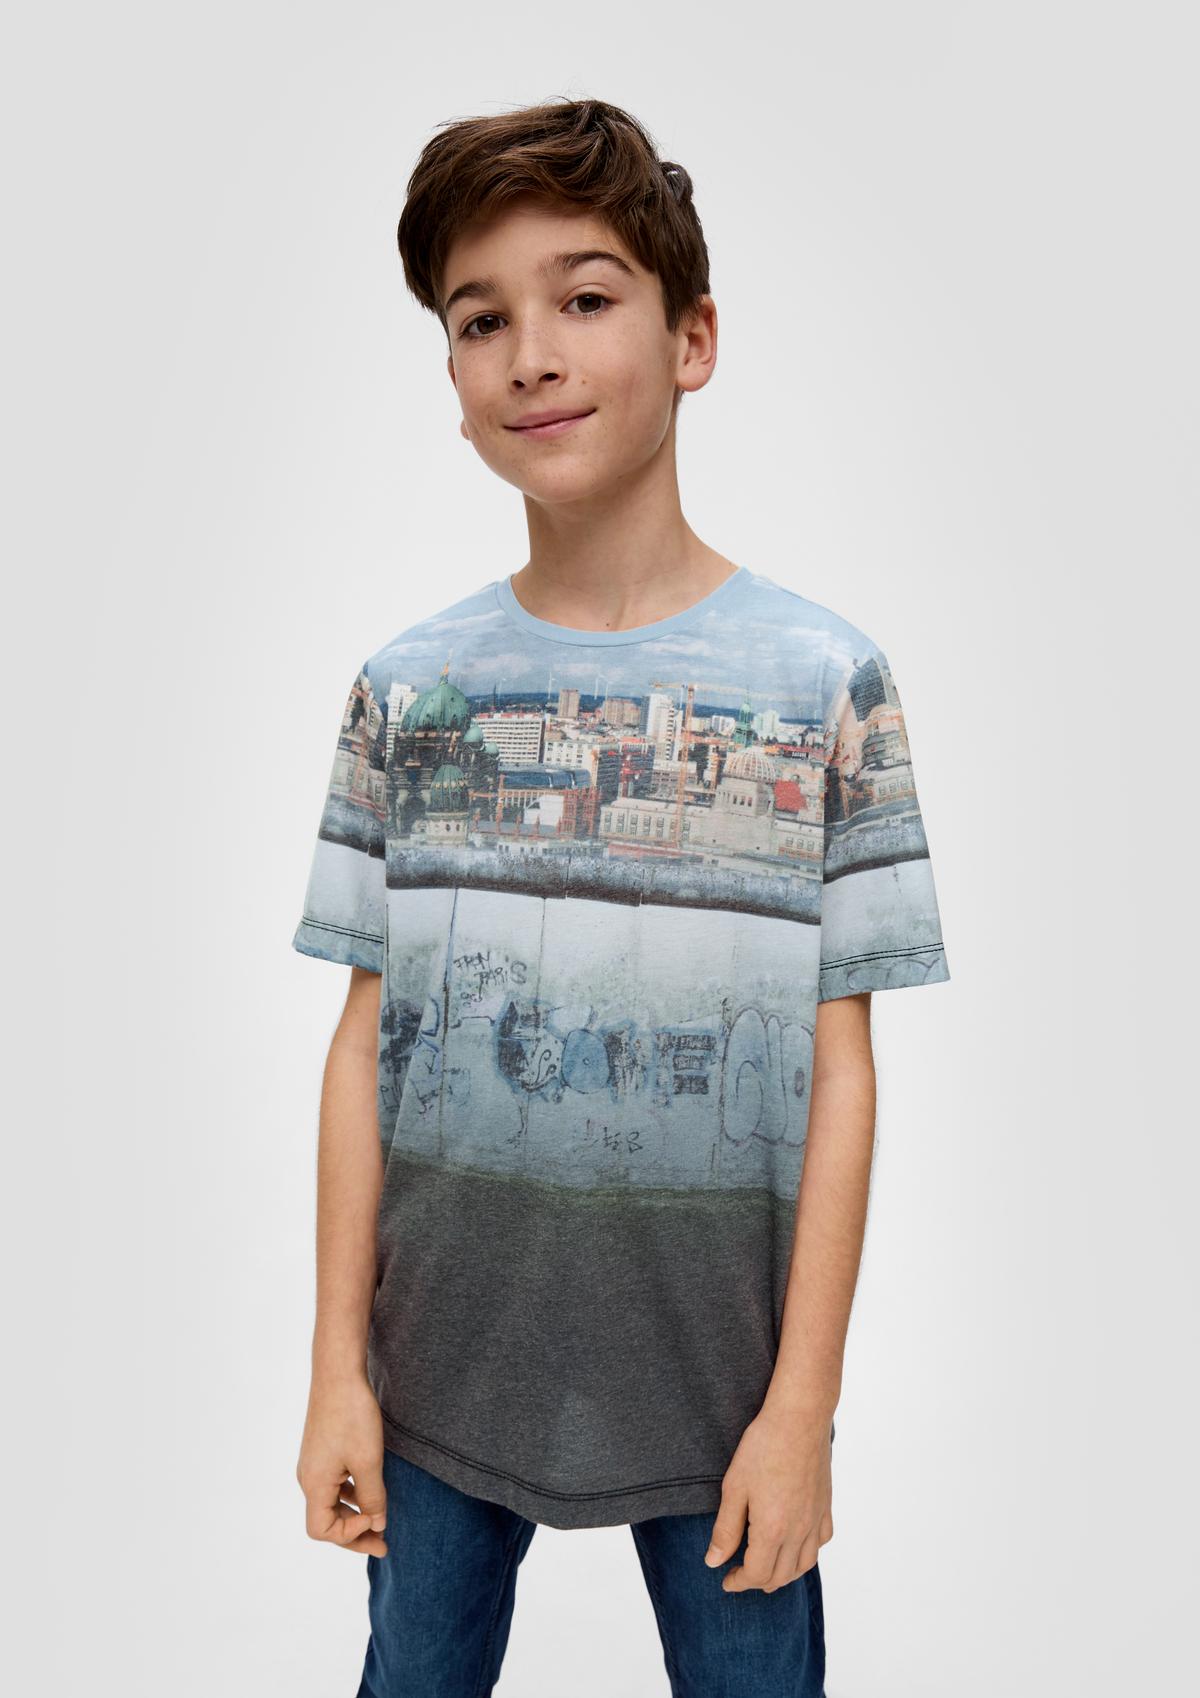 Kids\' fashion and clothing for boys and teens